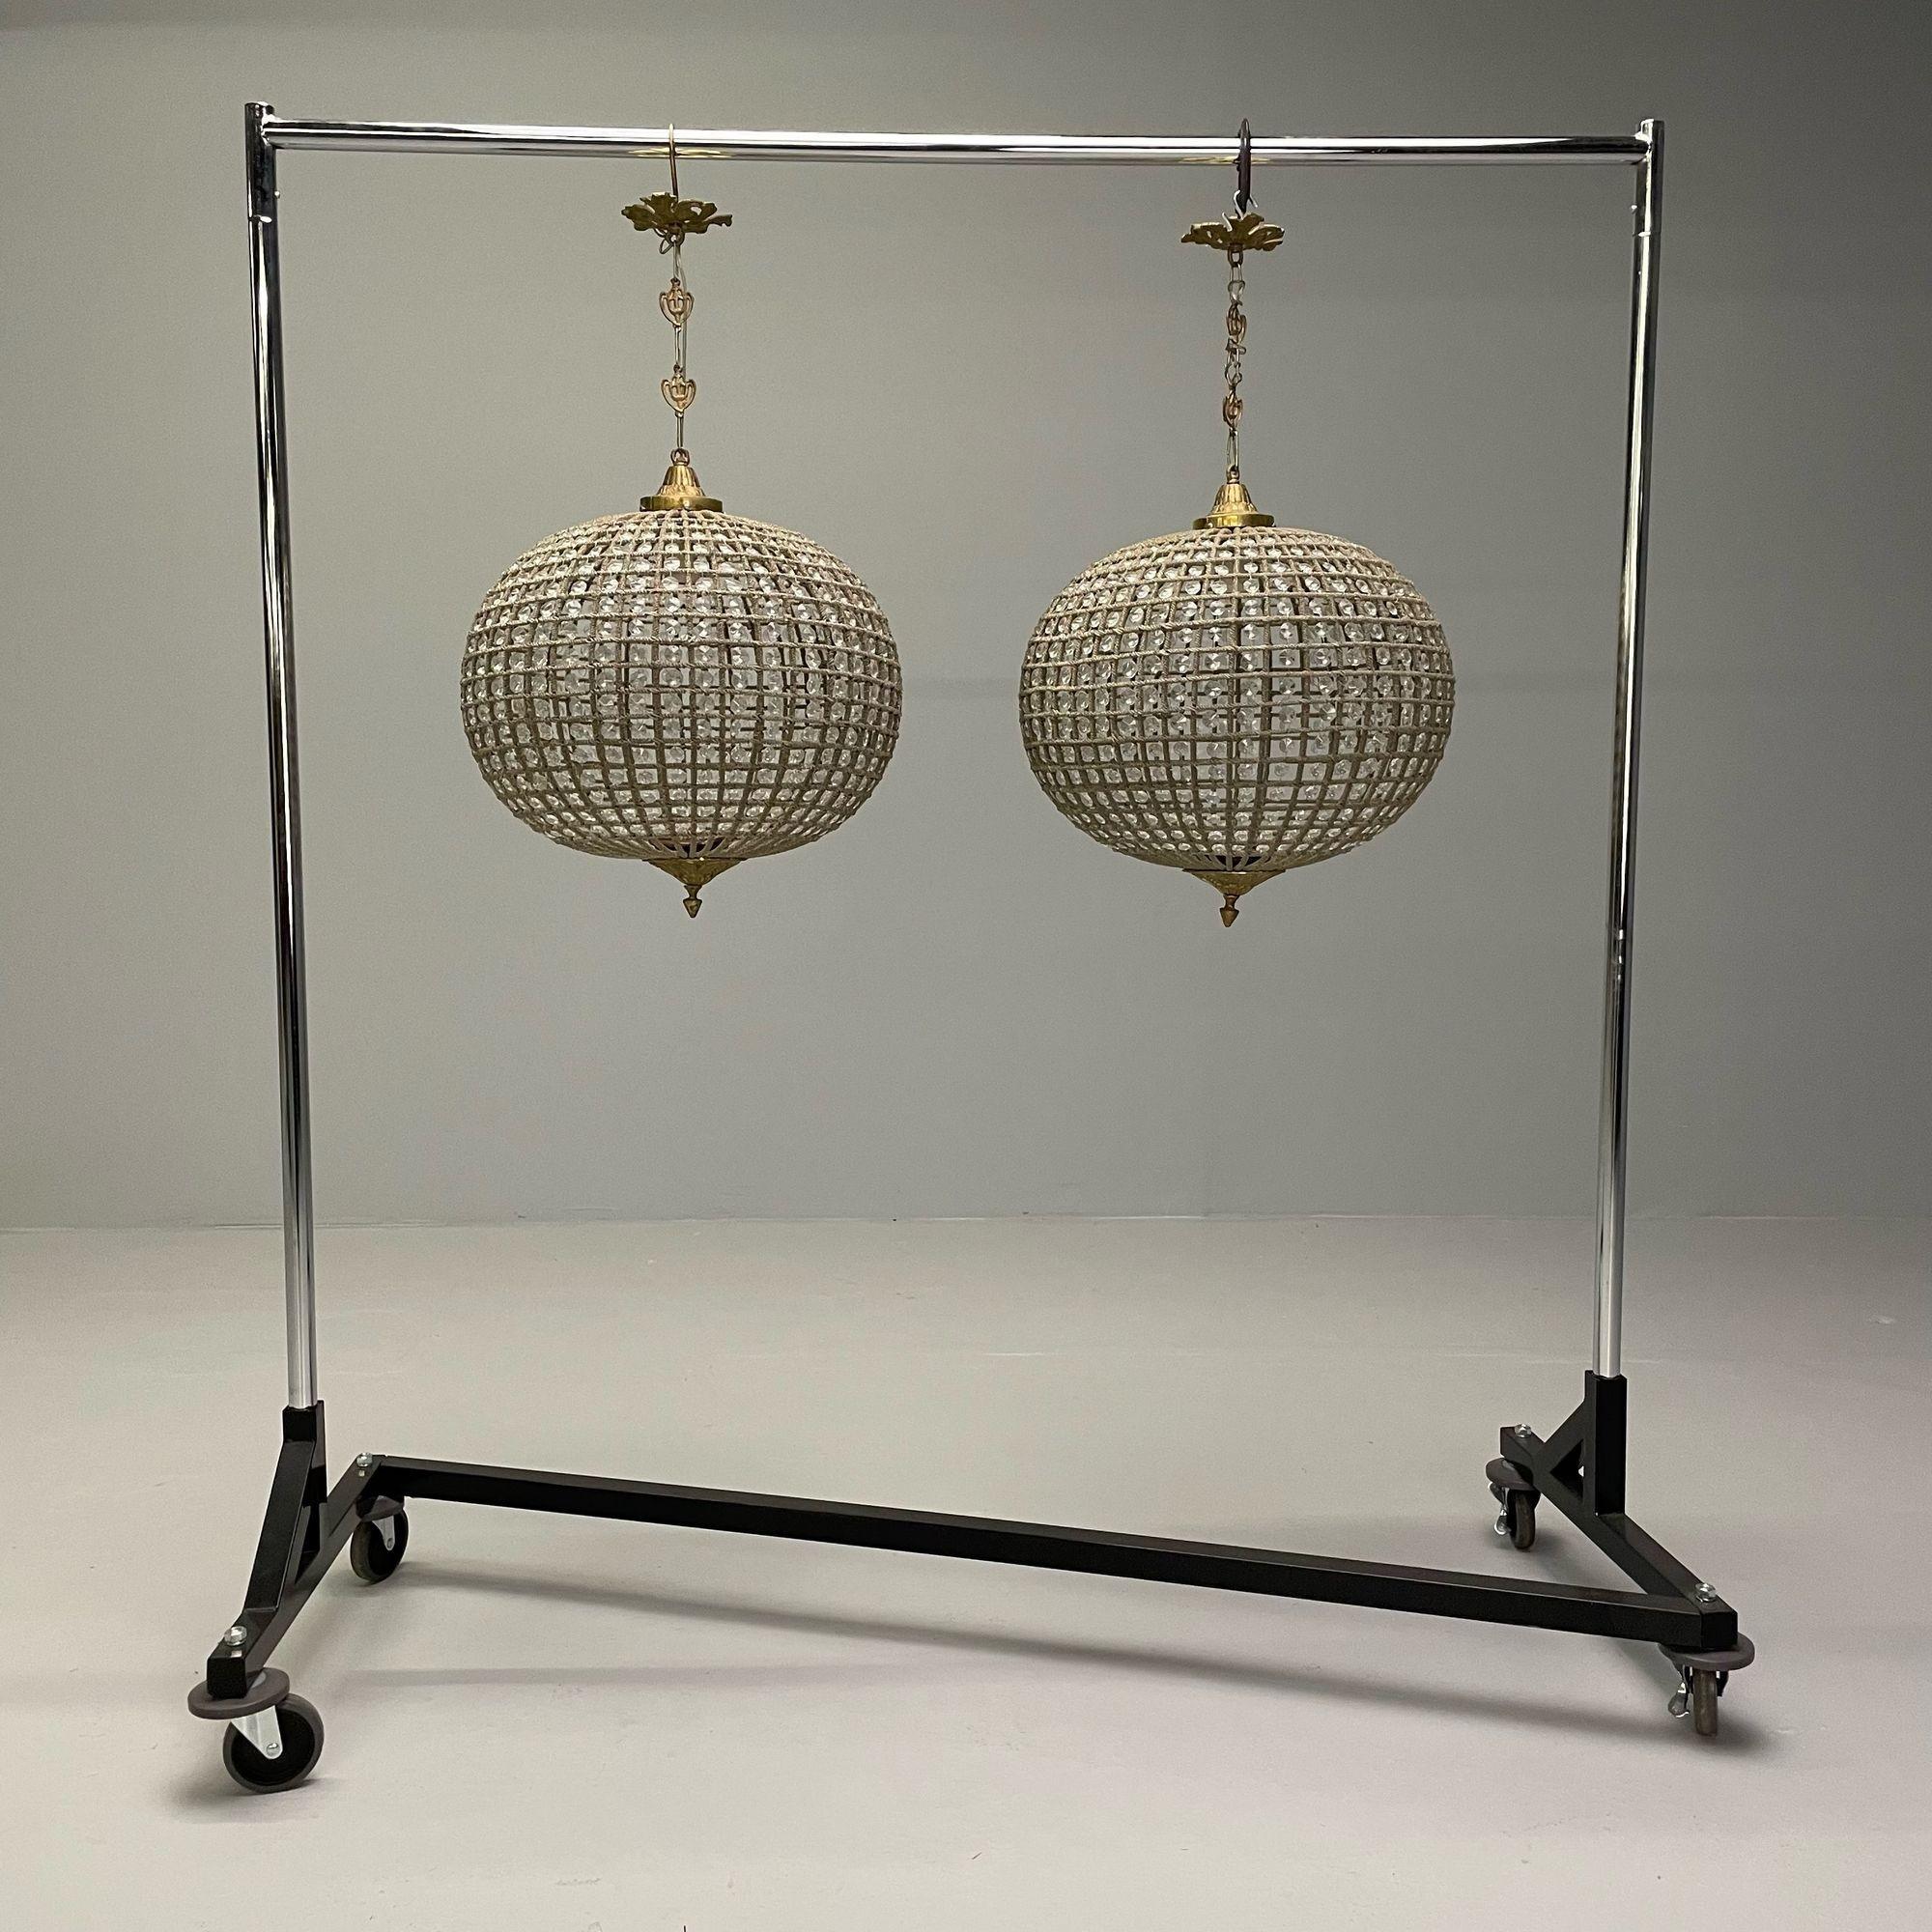 Art Deco, Round Chandeliers, Beveled Crystal, Metal, American, 1980s
A detailed pair of circular globe mesh wired and crystal lights. Exquisite pendant chandeliers, each in round shape wired with crystals. Each having a 11